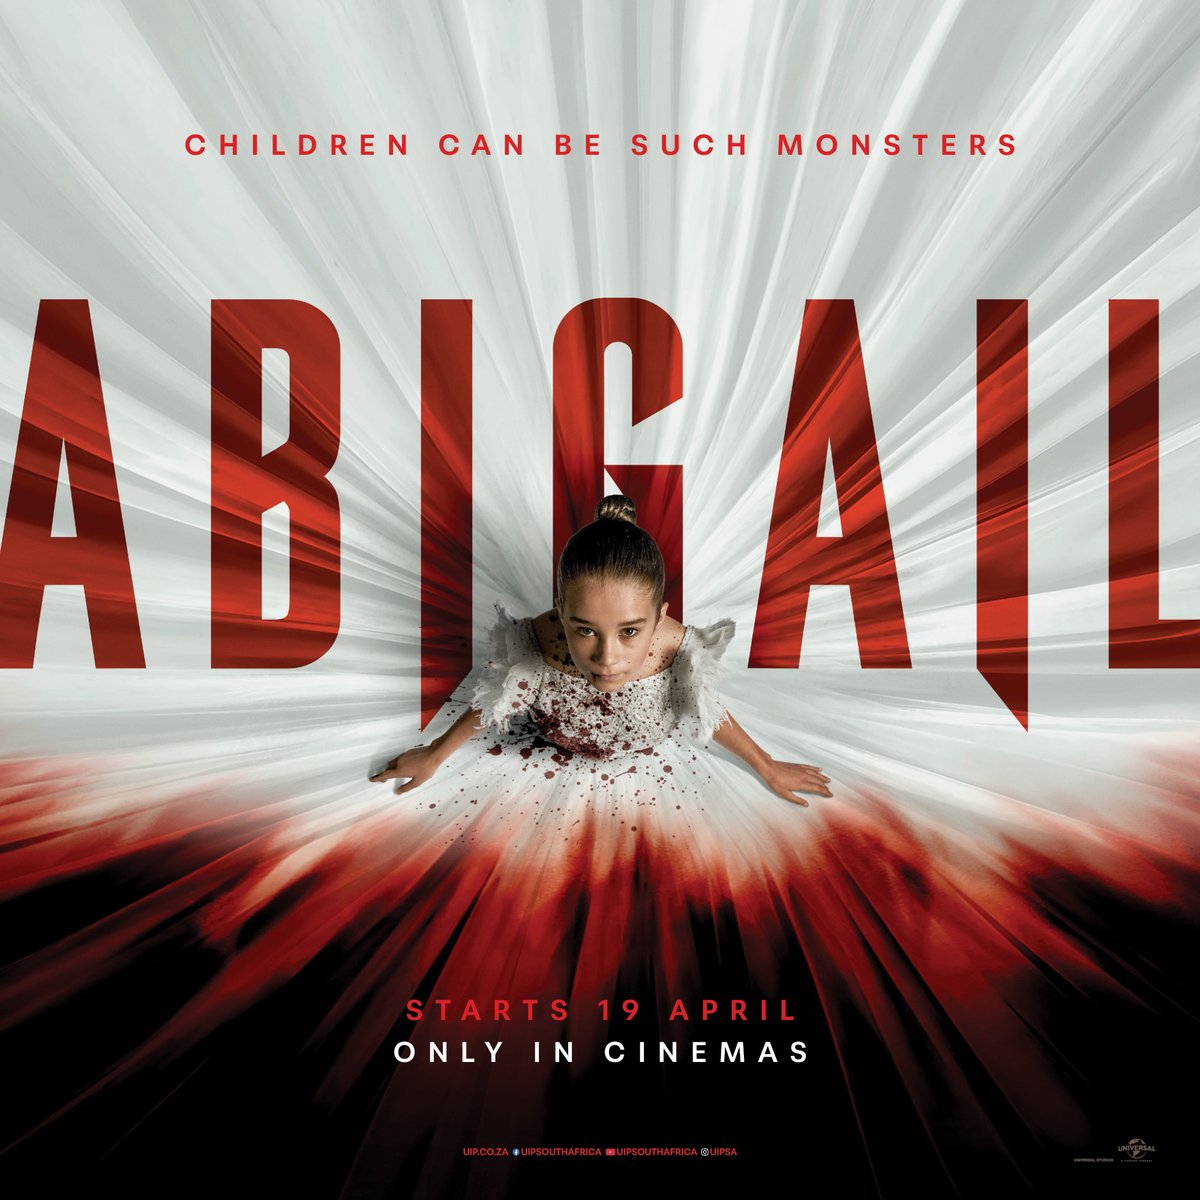 You're invited to dance with the devil. She's no ordinary child. 'Abigail' is coming to Nu Metro cinemas 19 April.! Book Tickets Now >> numet.ro/abigail @numetro